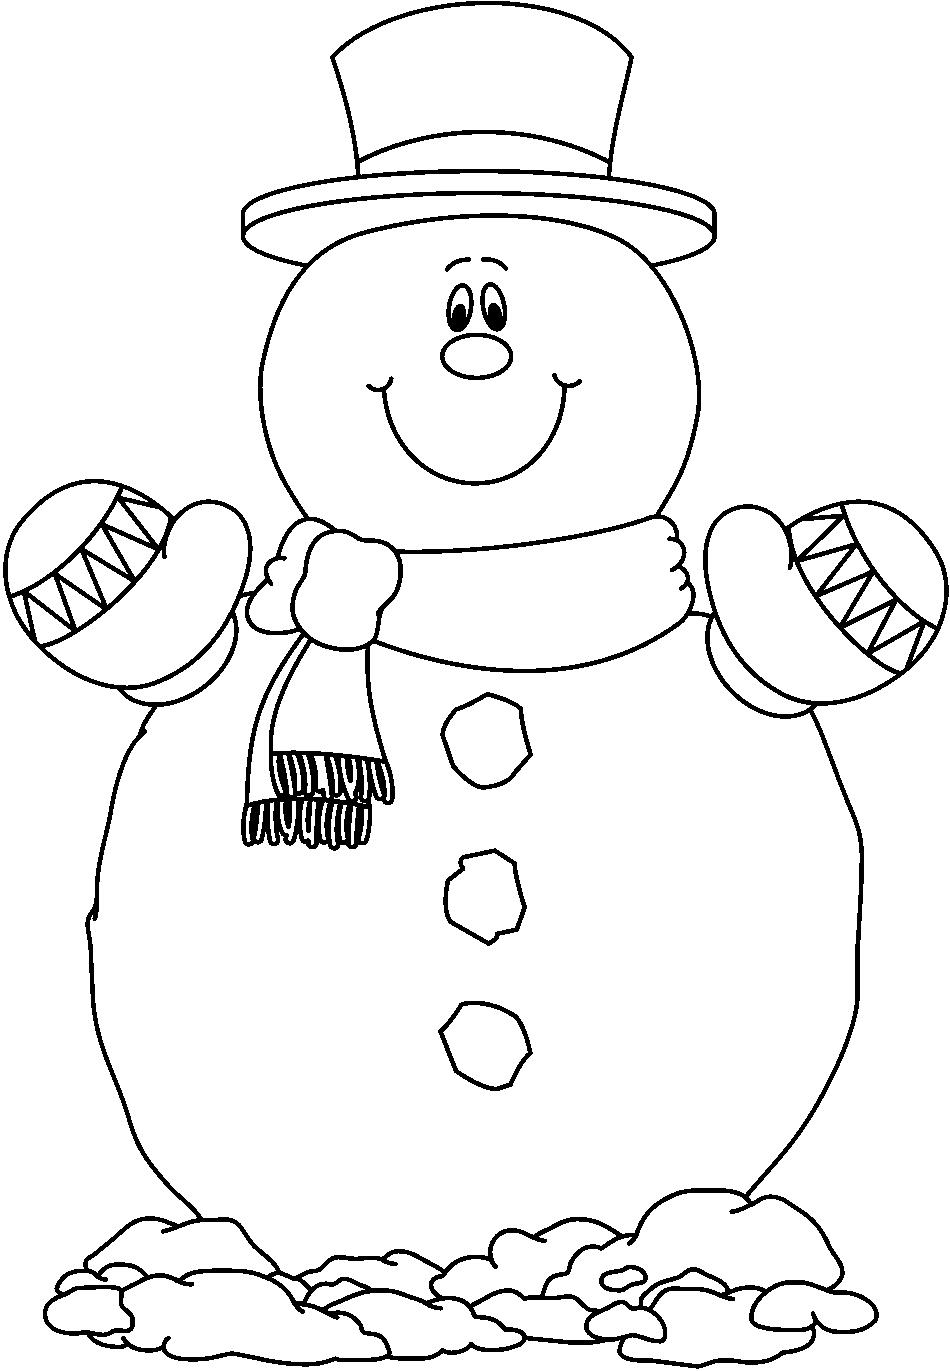 Snowman Clipart Outline / Snowman Black And White Black And White ...